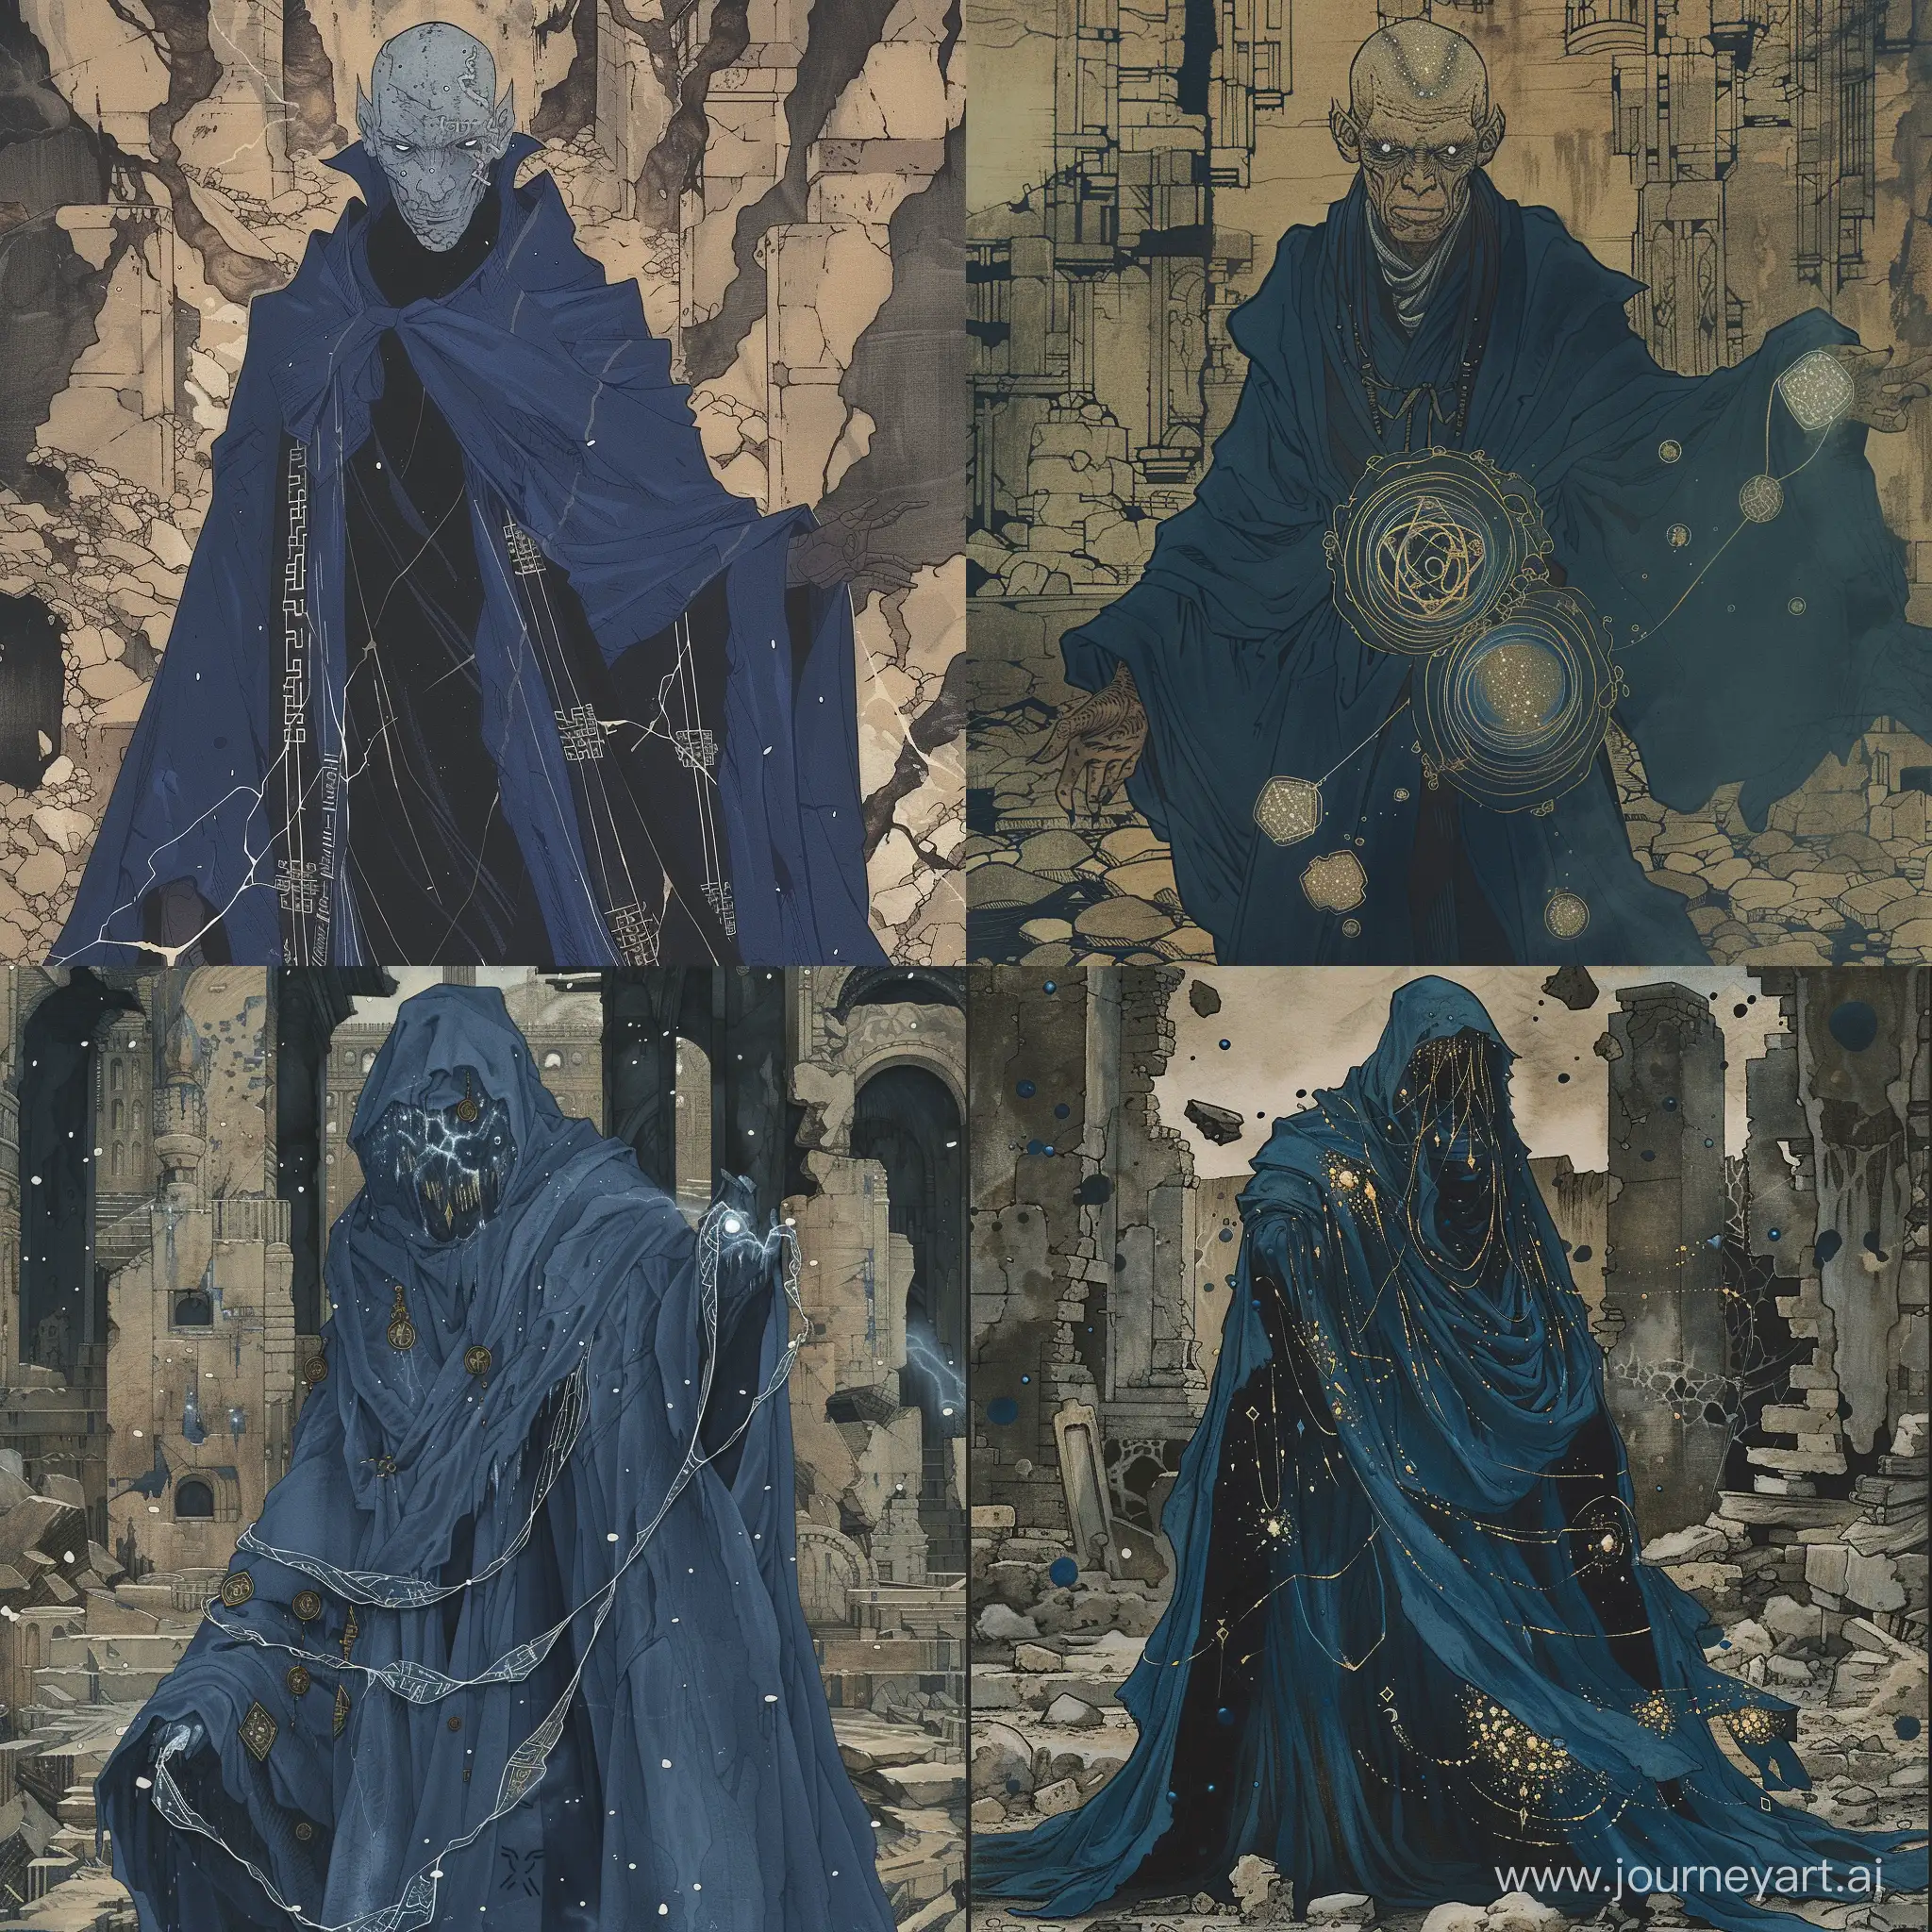 A figure draped in robes of midnight blue, adorned with shimmering runes that flicker with arcane power. His eyes, once bright with wisdom, now burn with a cold, unfeeling light, and his features are twisted by the corruption of dark magic, in a  crumbling ruins, Ukiyo-E painting style, wood block printing, vintage, japanese style